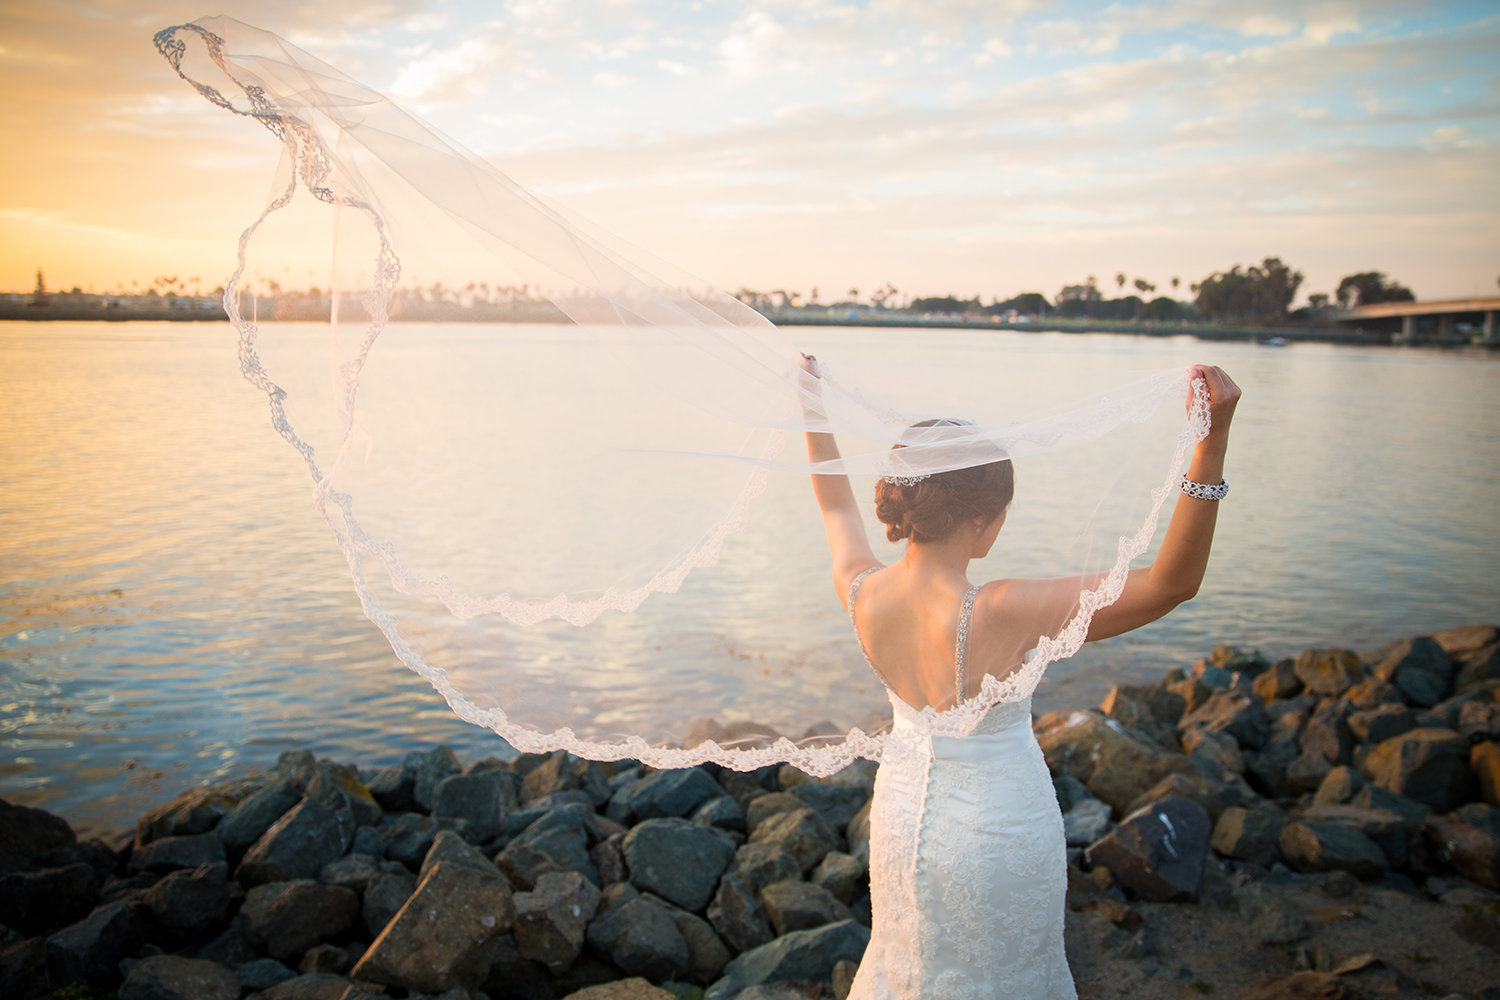 Bride's veil blowing in the wind with a beautiful Misison Bay sunset.